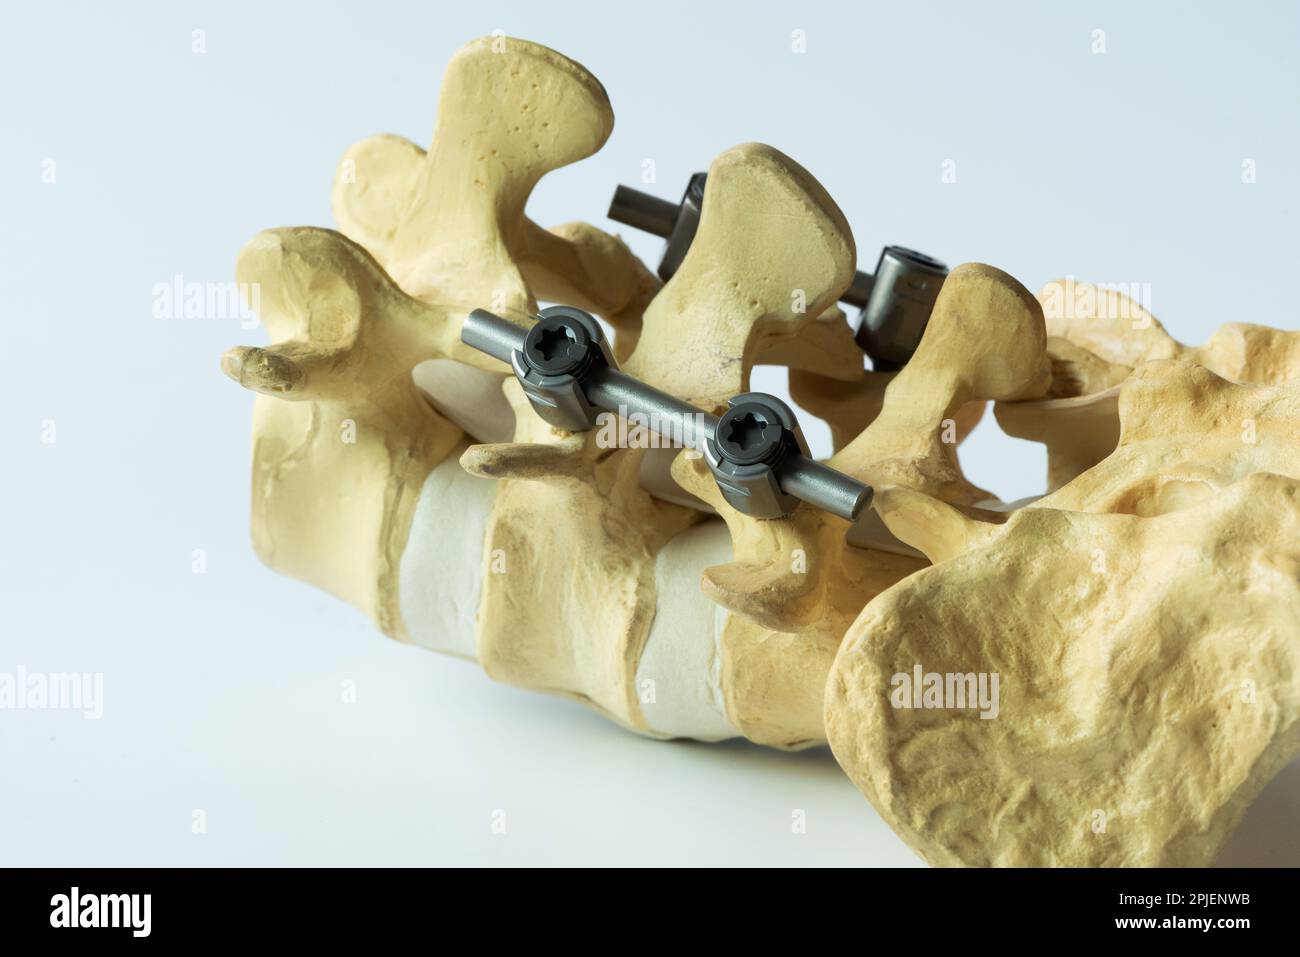 Close-up view instrument fixation of lumbar spine model on white background. Stock Photo